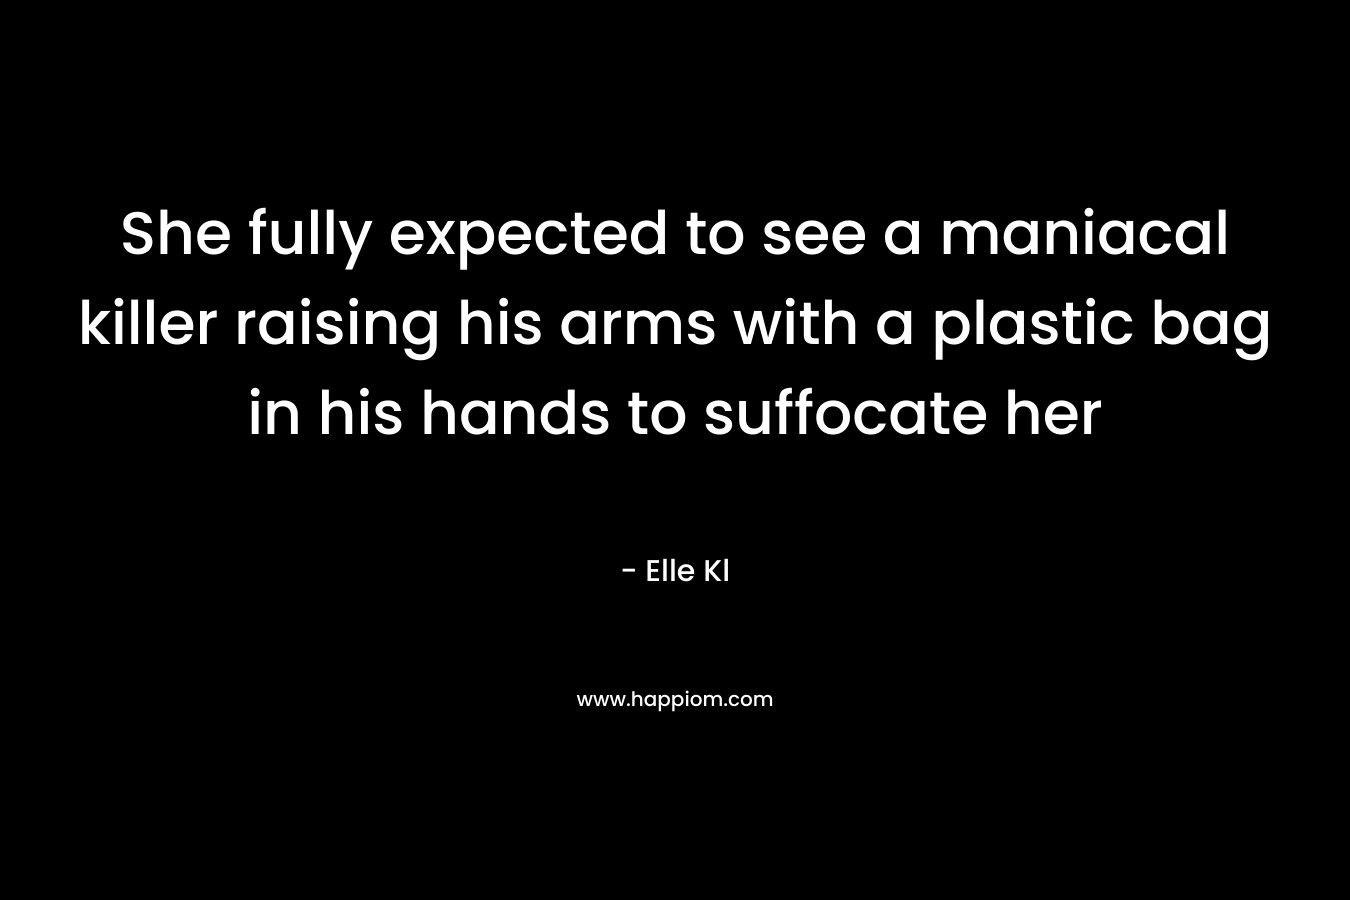 She fully expected to see a maniacal killer raising his arms with a plastic bag in his hands to suffocate her – Elle Kl